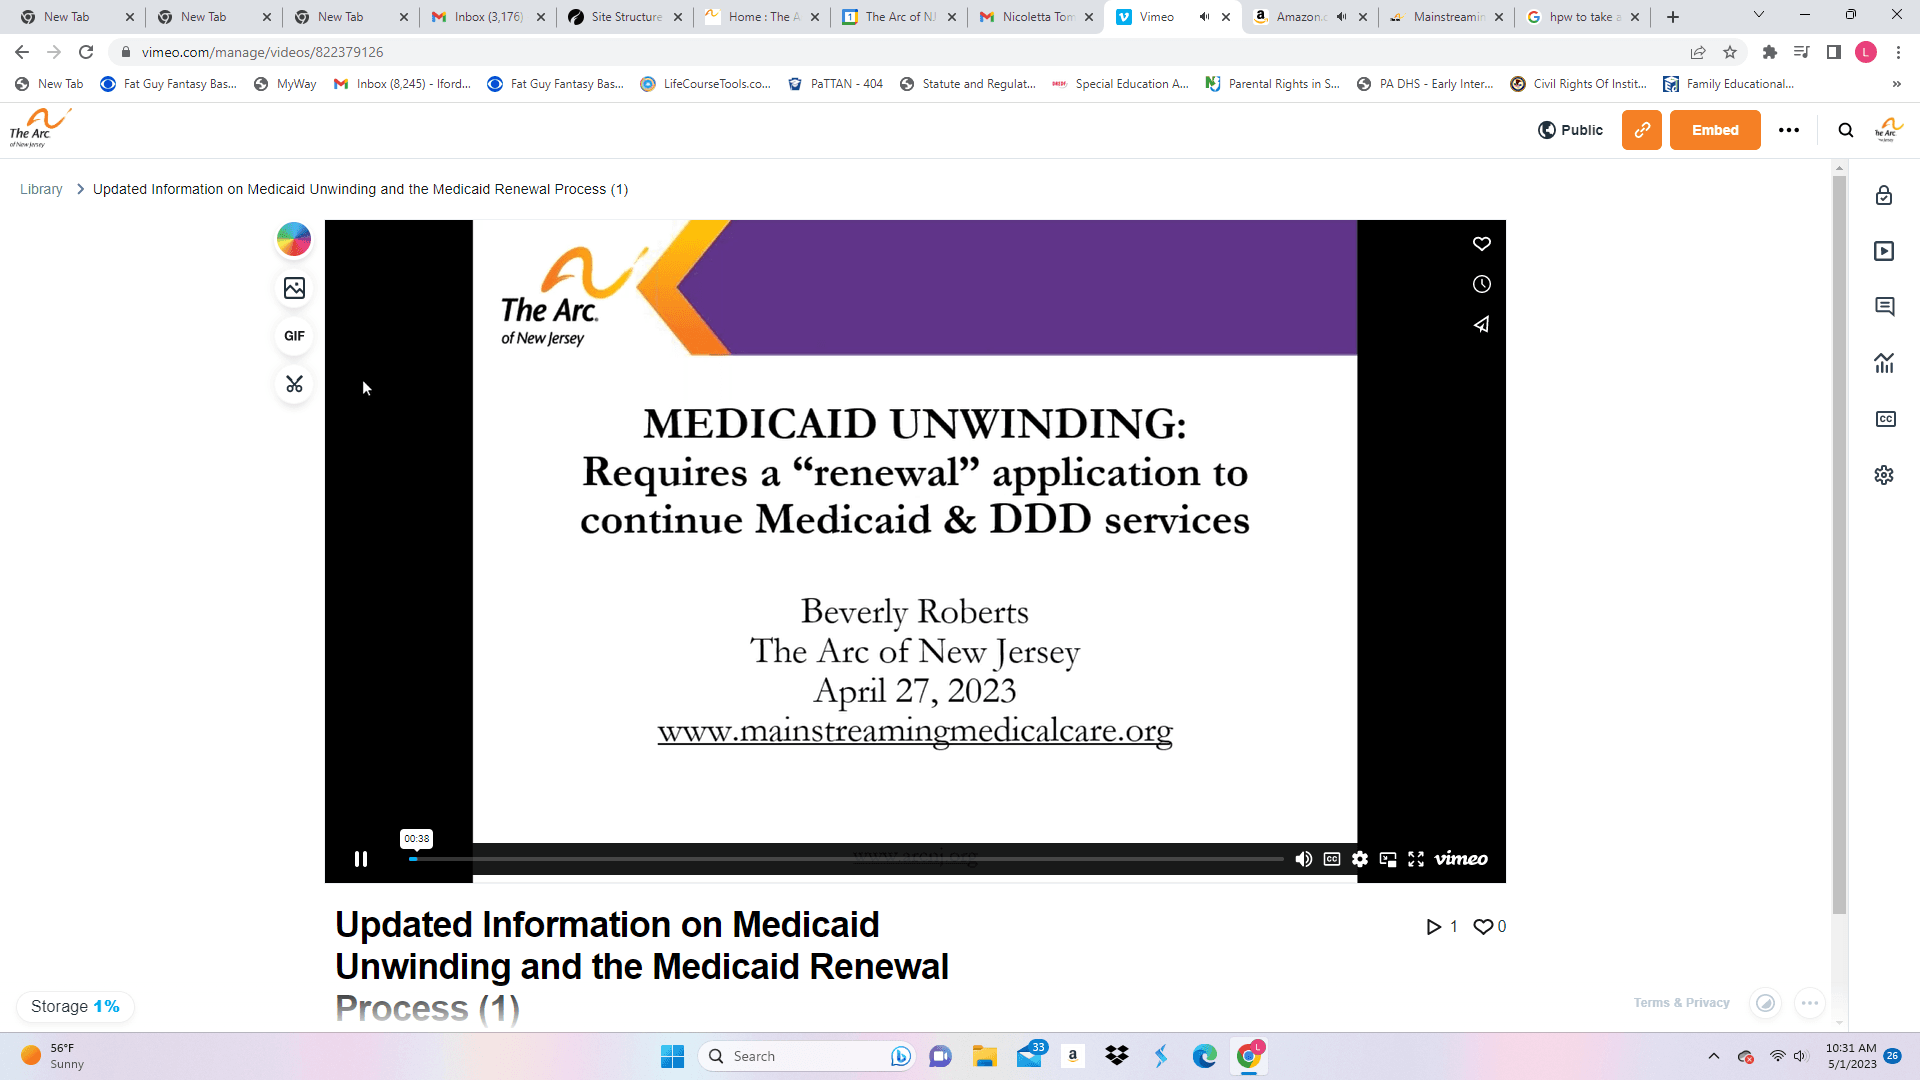 3/27/23 Updated Information on Medicaid Unwinding and the Medicaid Renewal Process